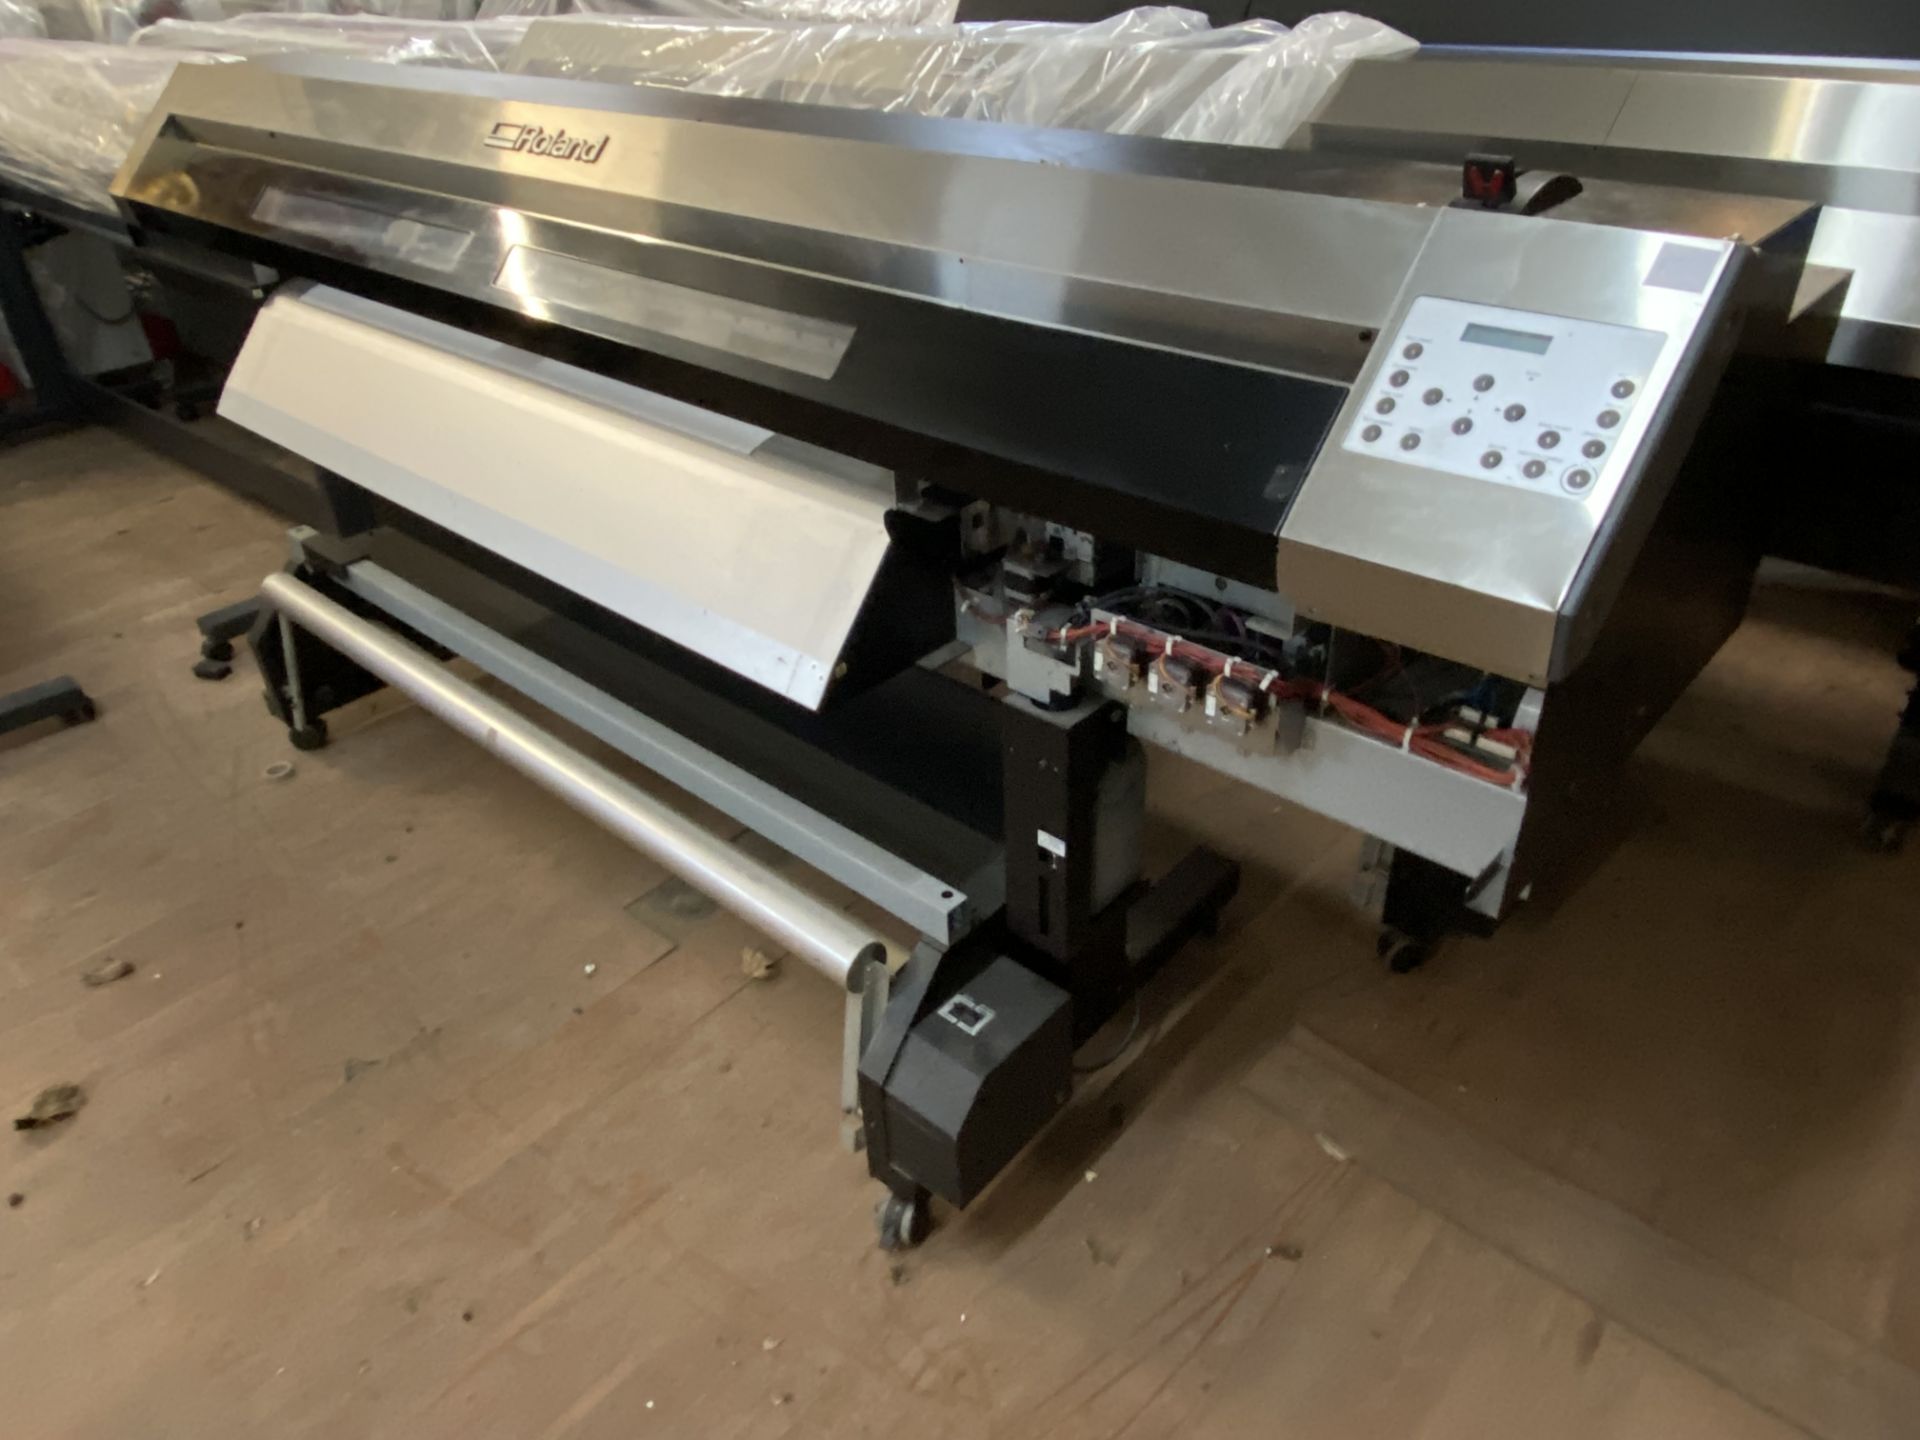 (R23) ROLAND XC-540 ECO SOLVENT PRINT AND CUT LARGE FORMAT PRINTER - Image 2 of 3